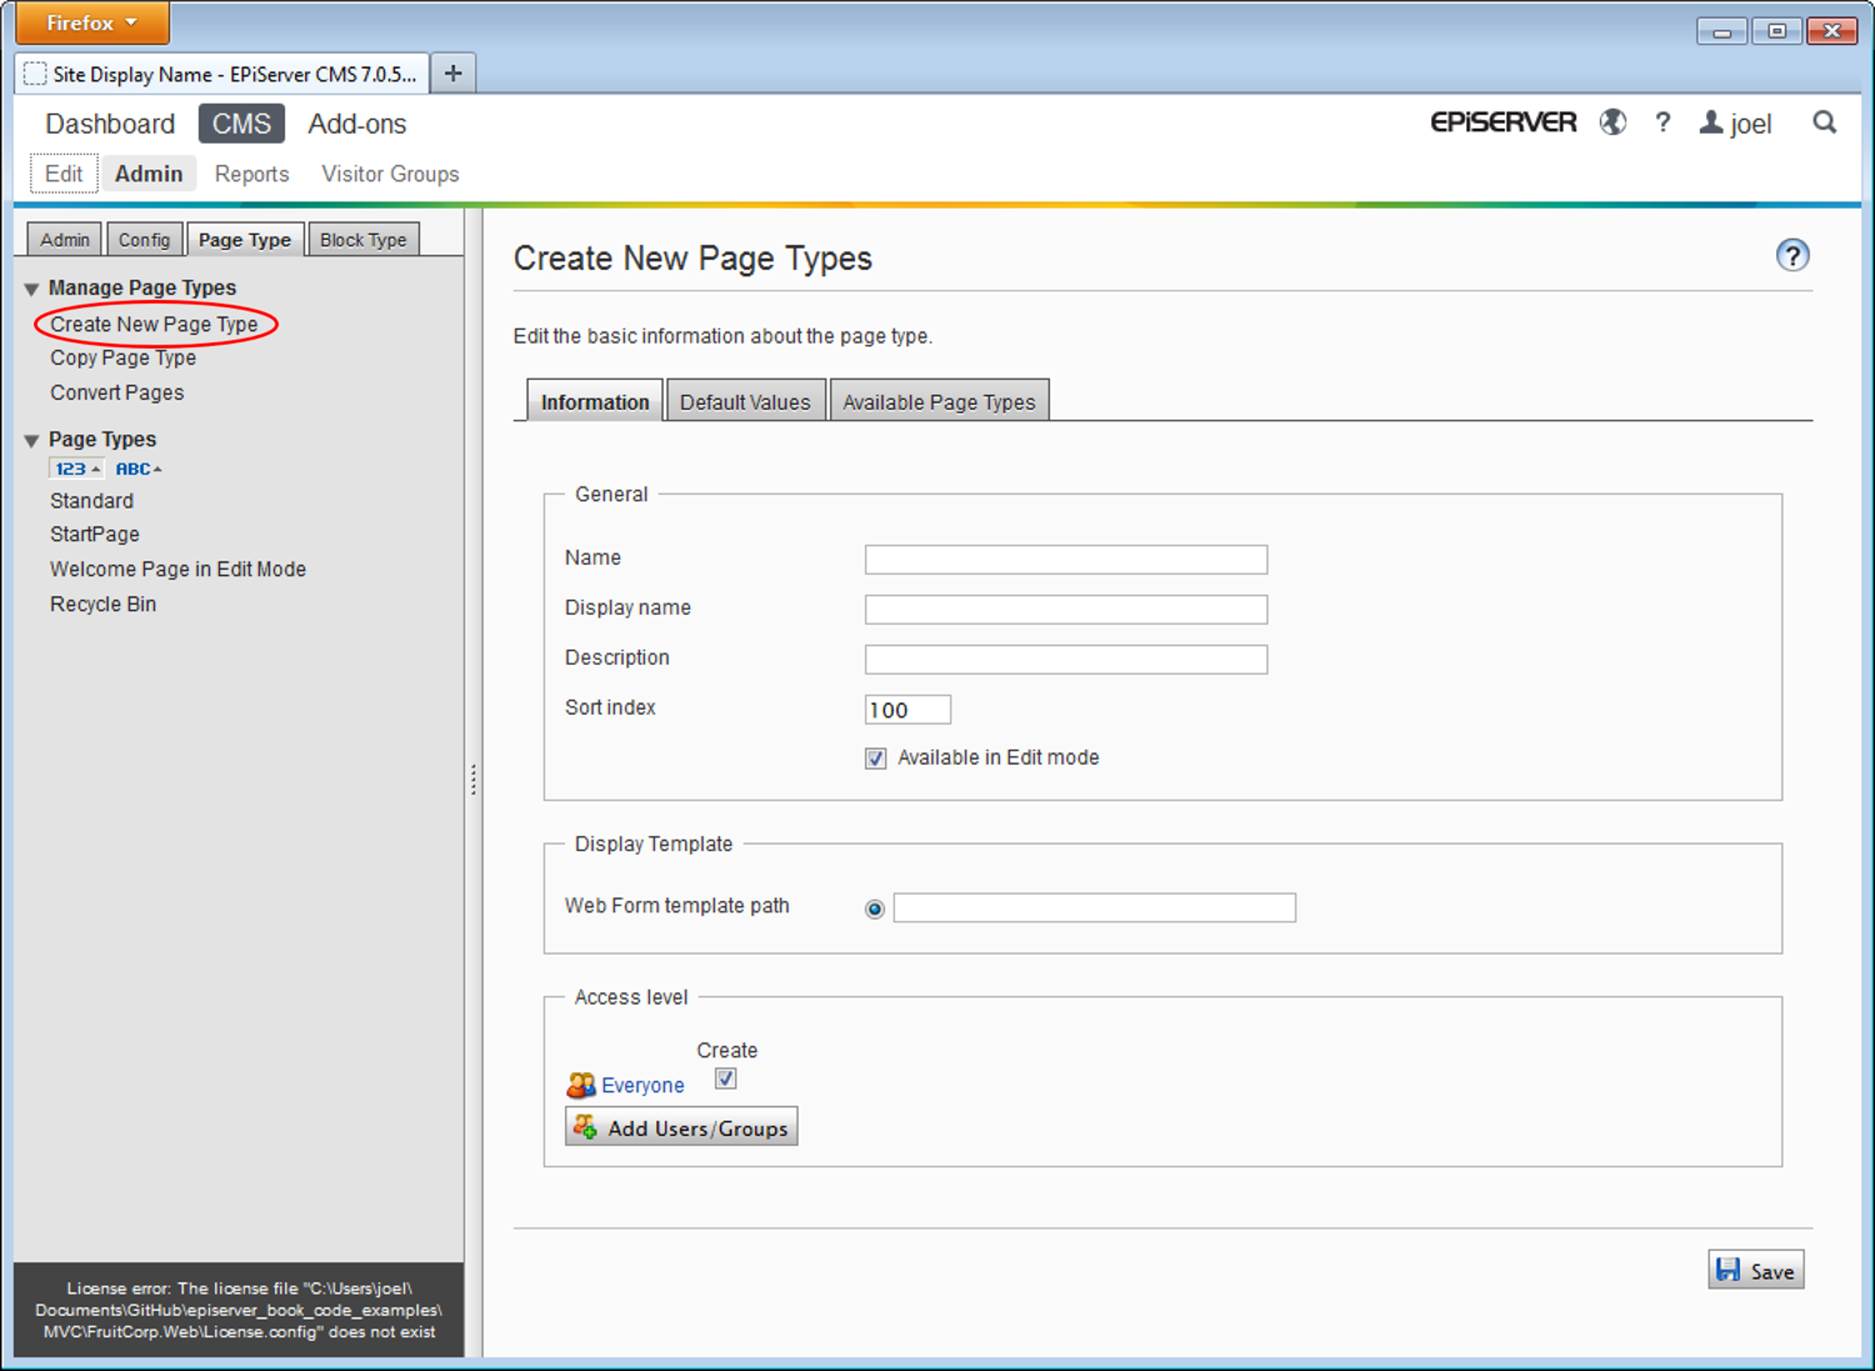 The dialog for creating a new page type in admin mode.